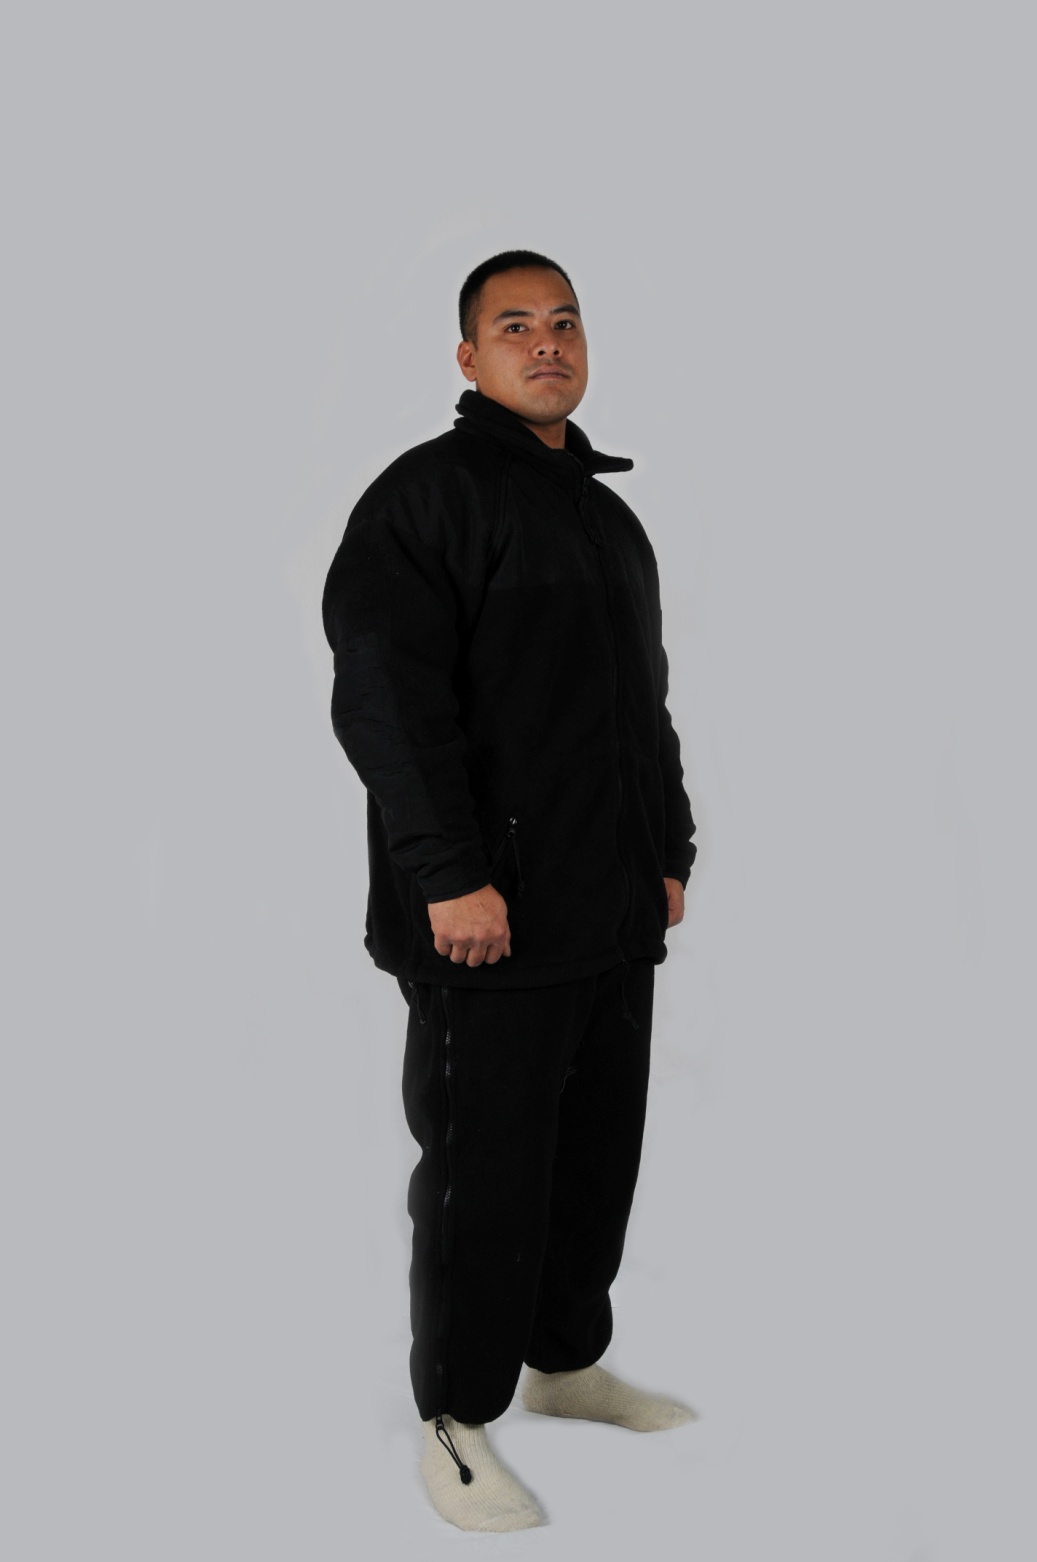 Details about   Classic 200 POLARTEC Extreme Cold Weather Black Fleece Overall MEDIUM LONG New! 